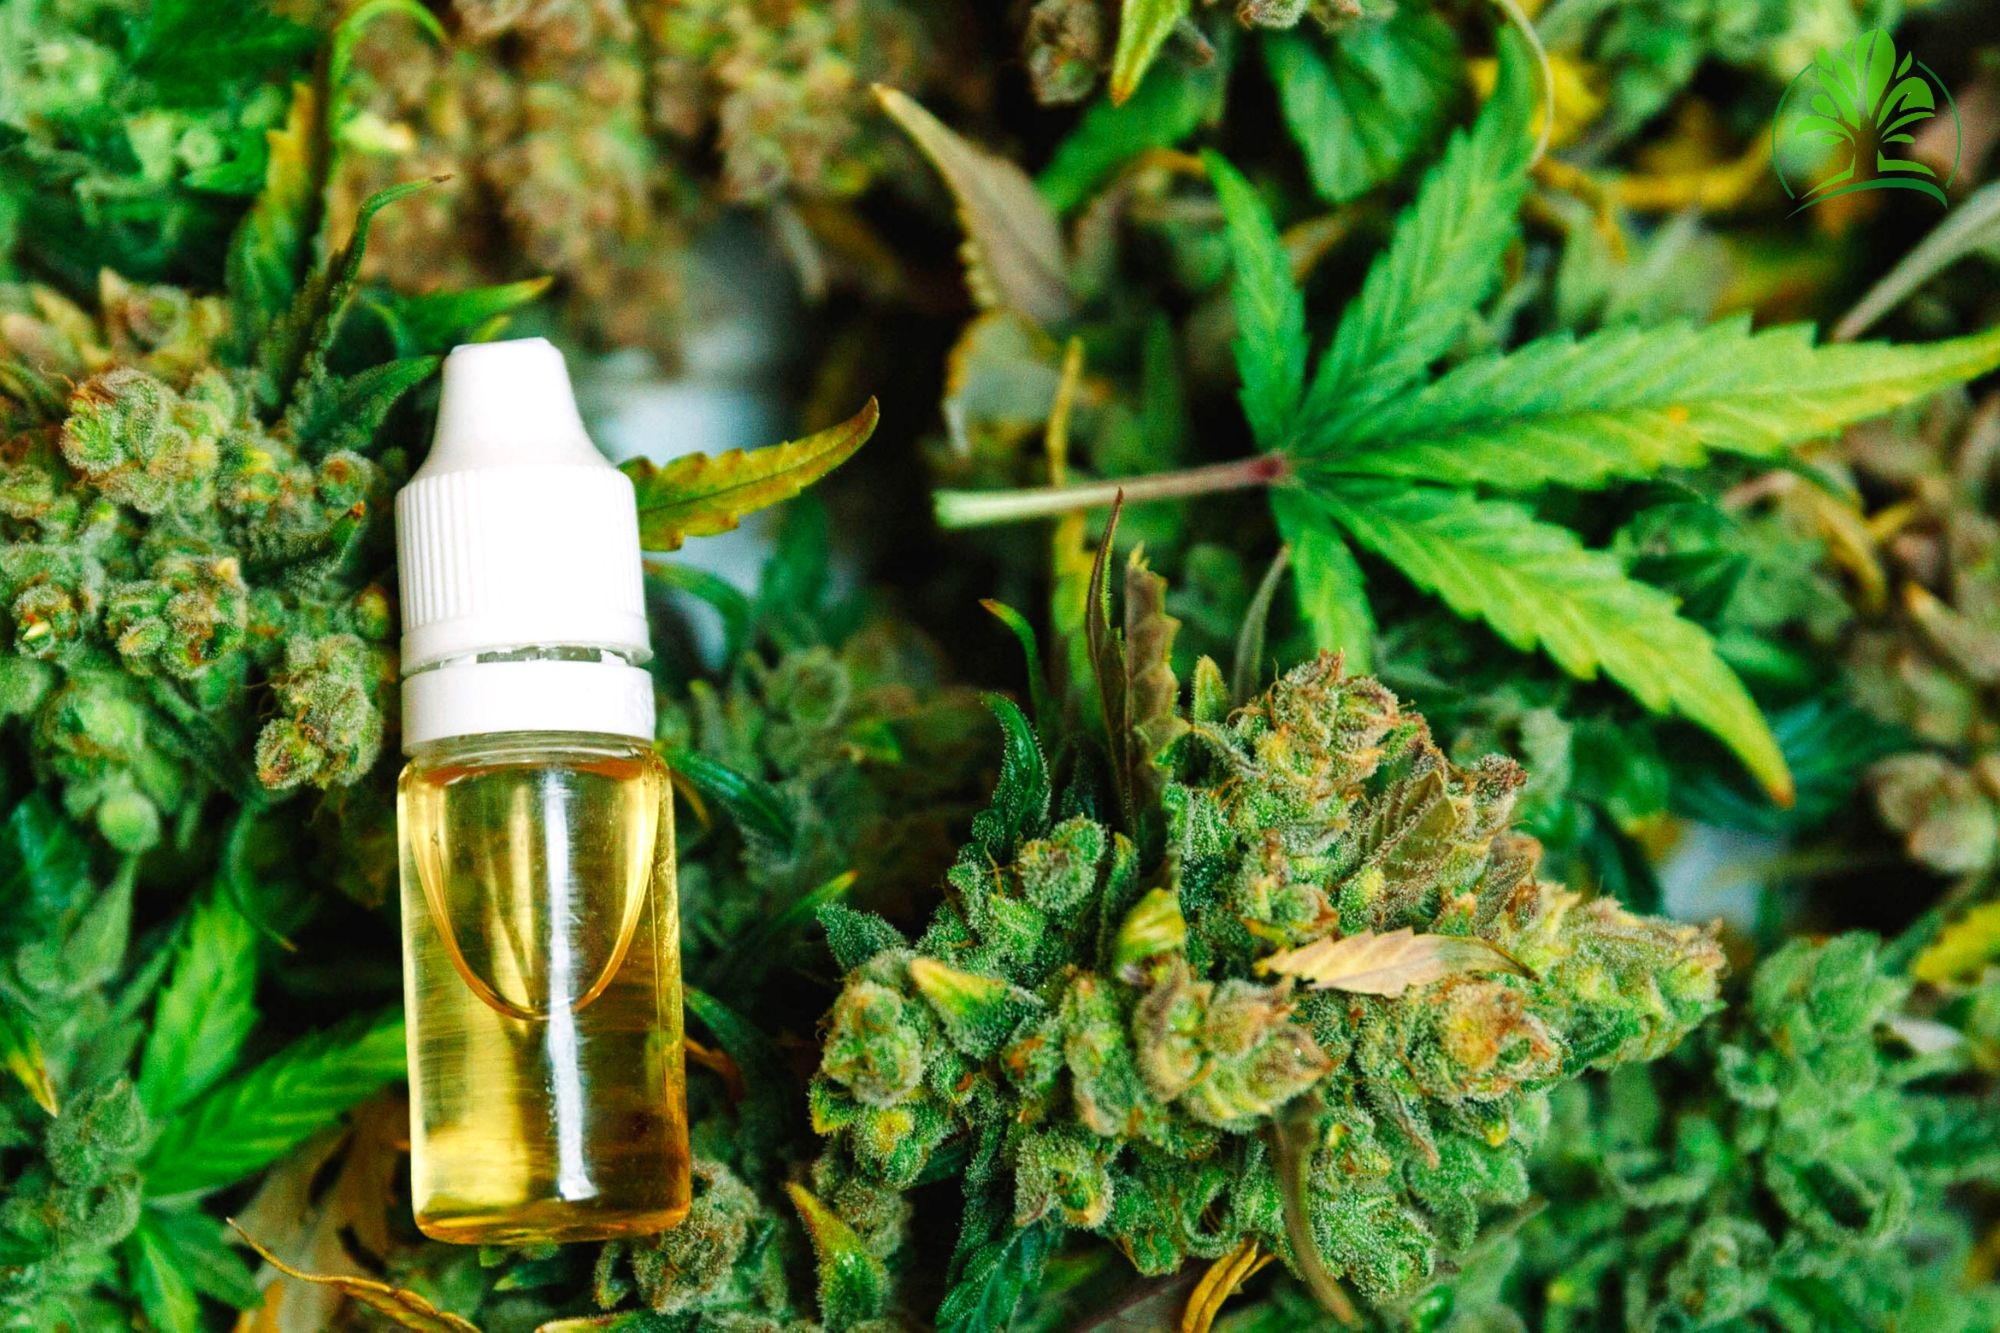 Who Could Benefit from Hemp Oil Products?